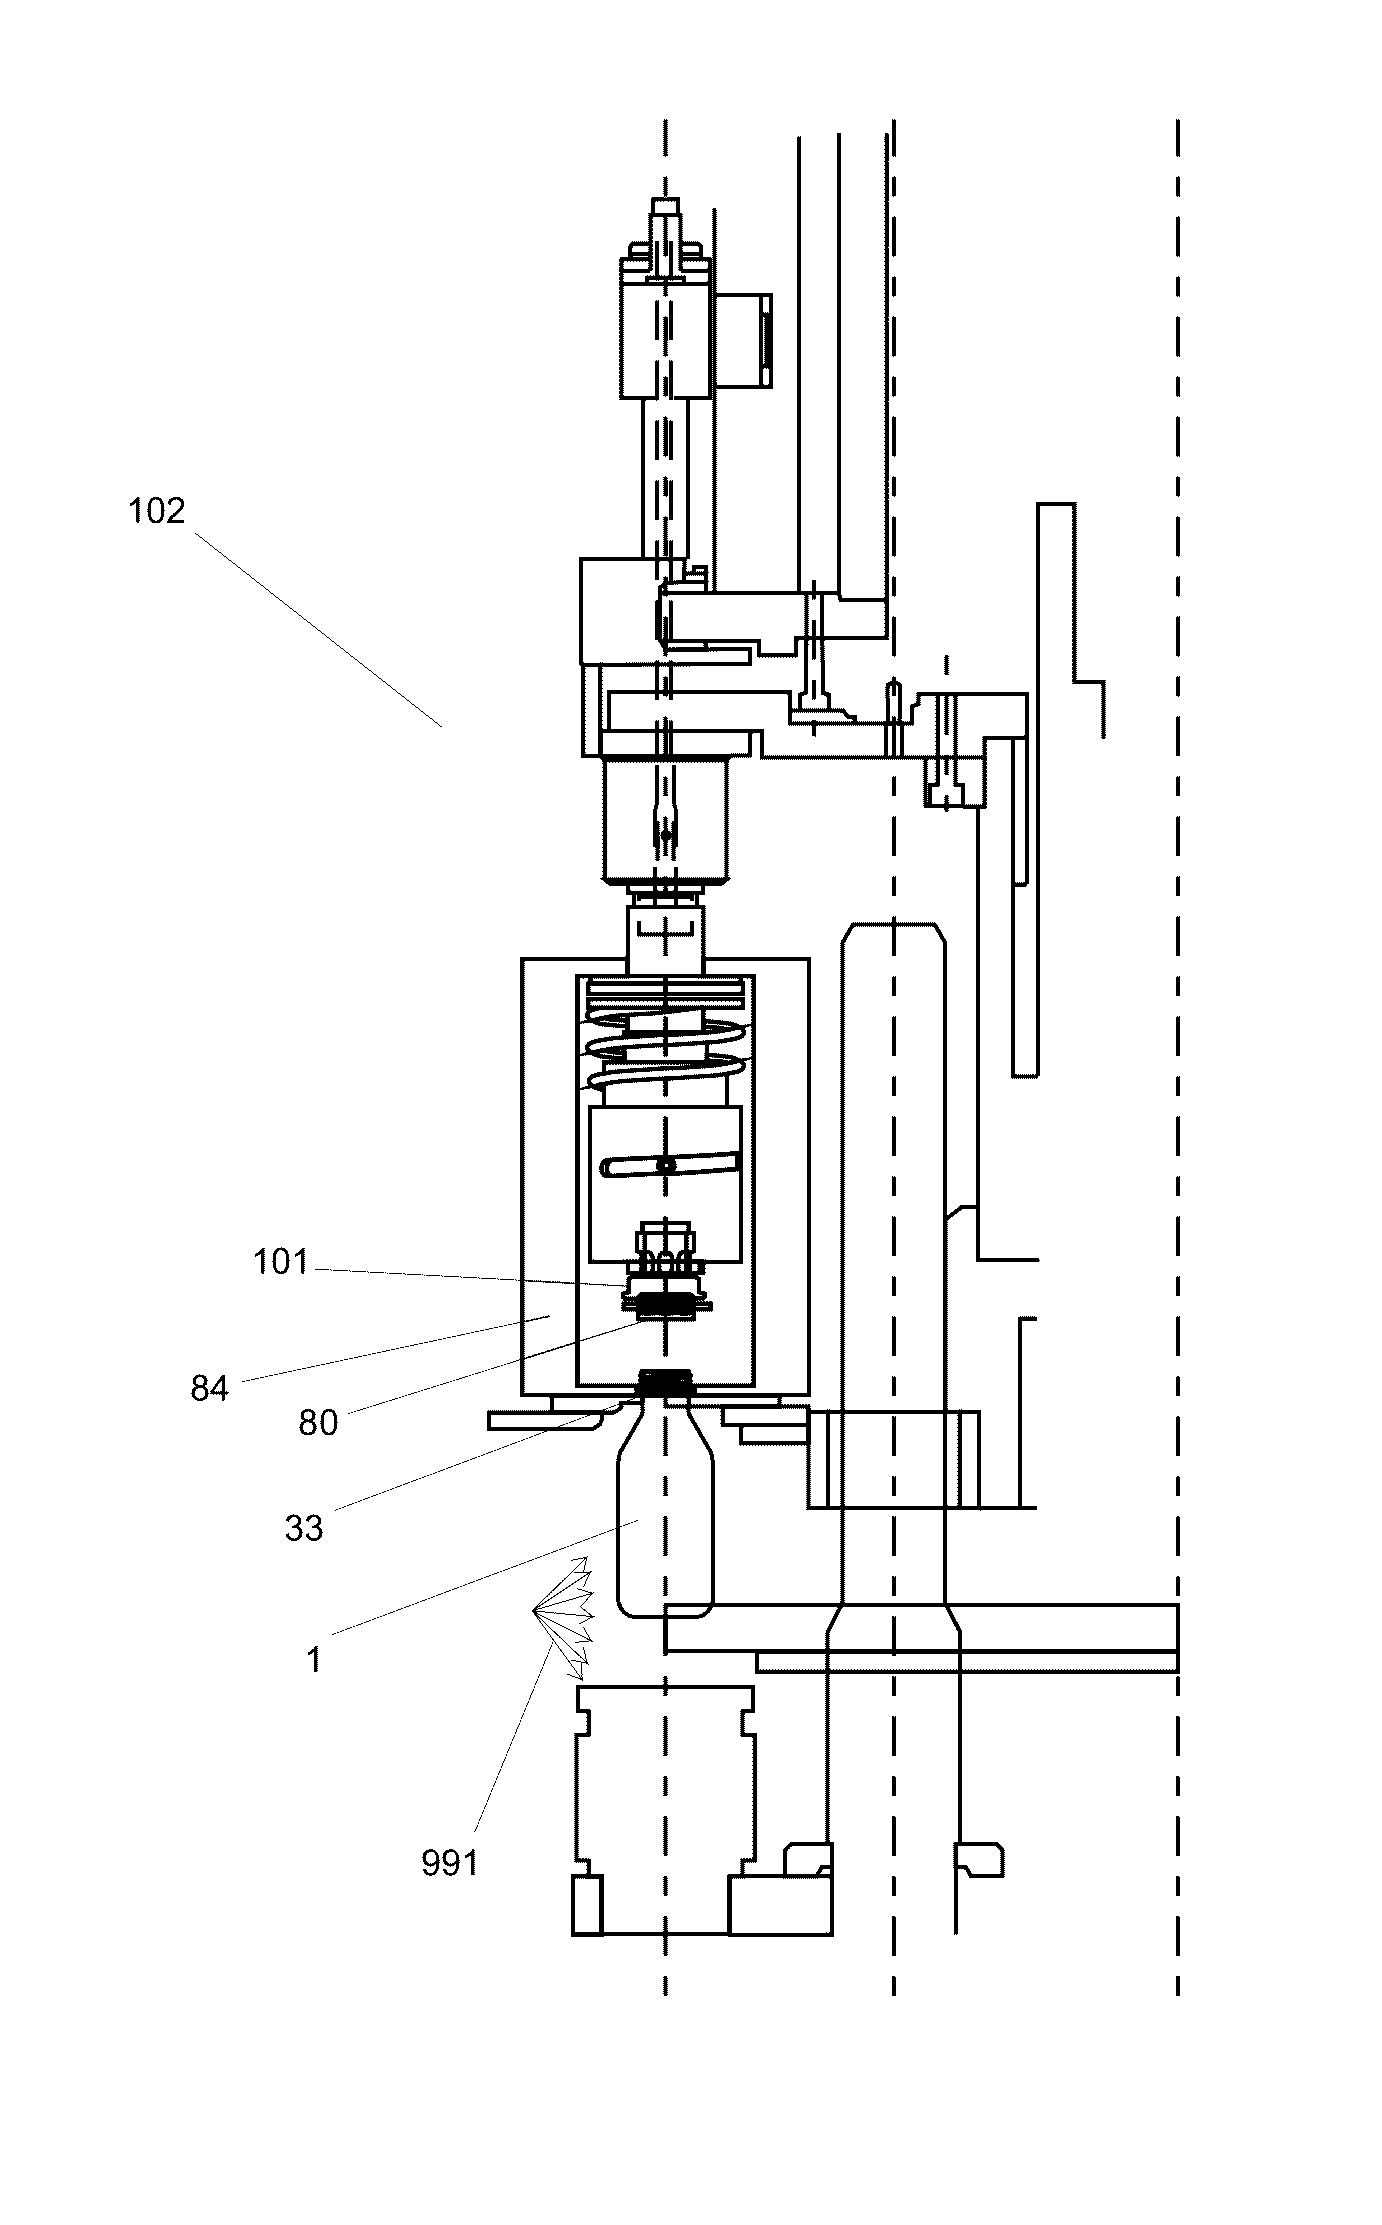 Controlled container headspace adjustment and apparatus therefor